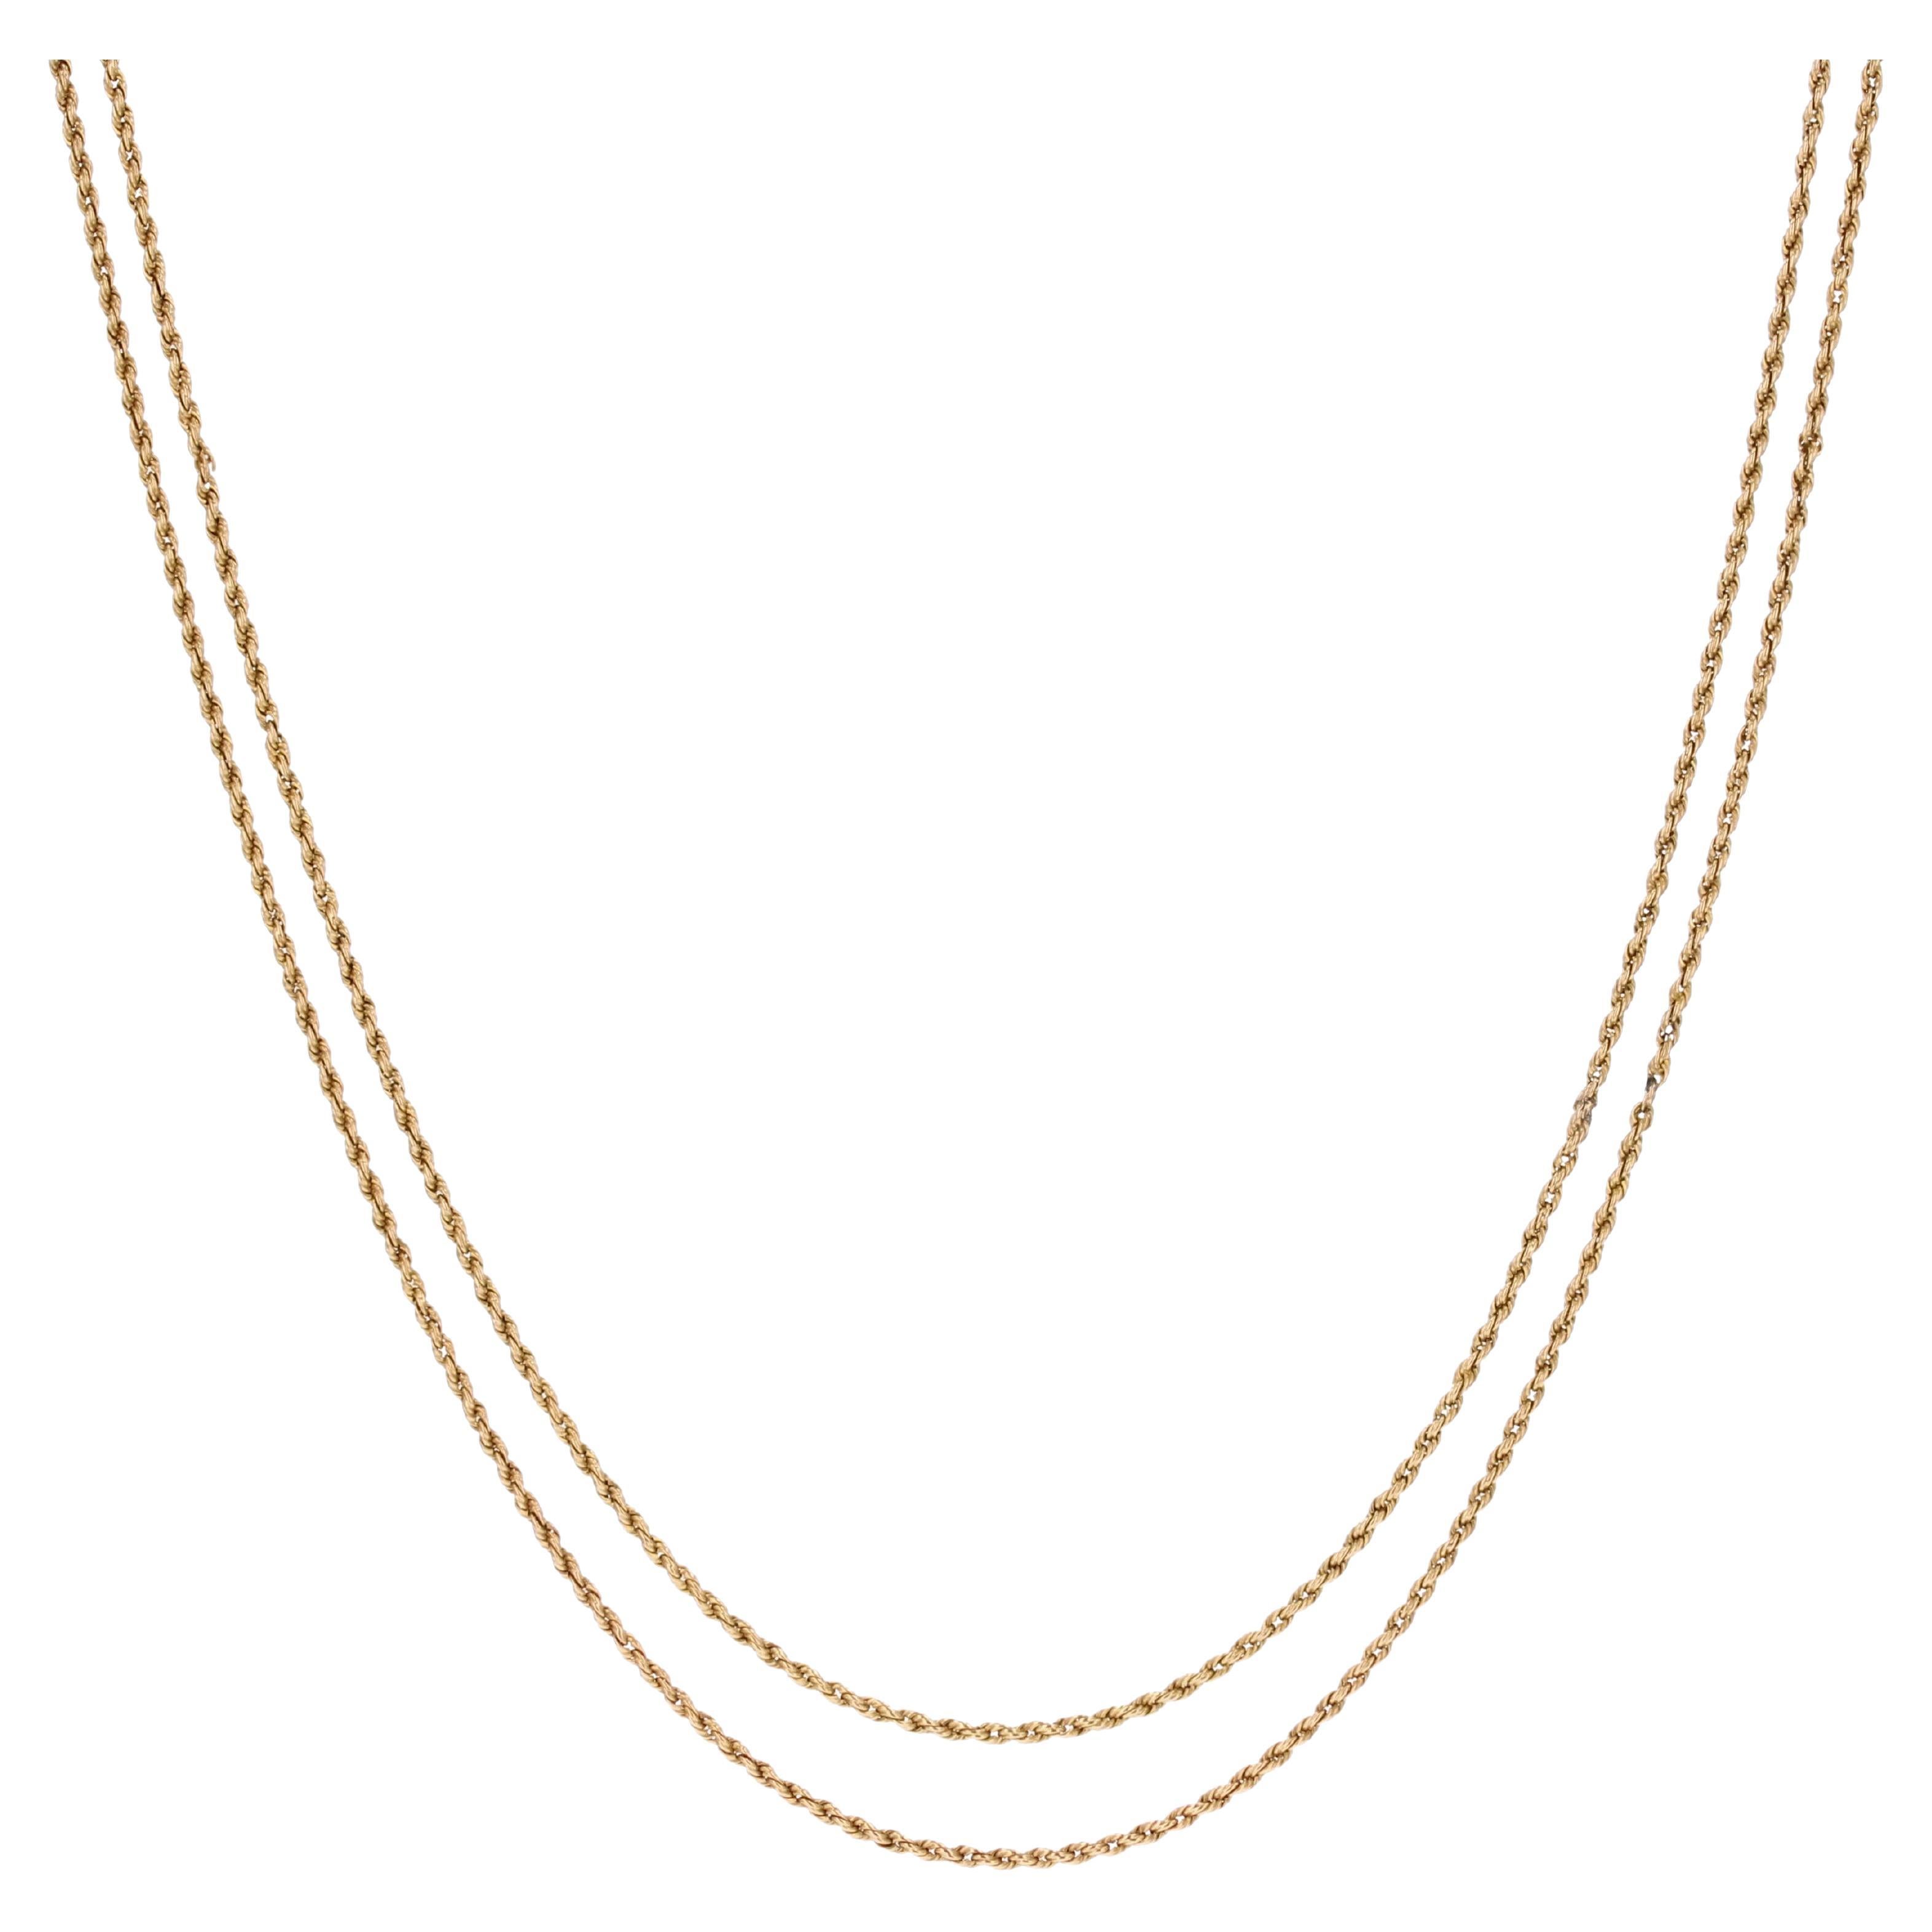 Antique 18 Karat Yellow Gold Twisted Link Matinee Long Chain Necklace